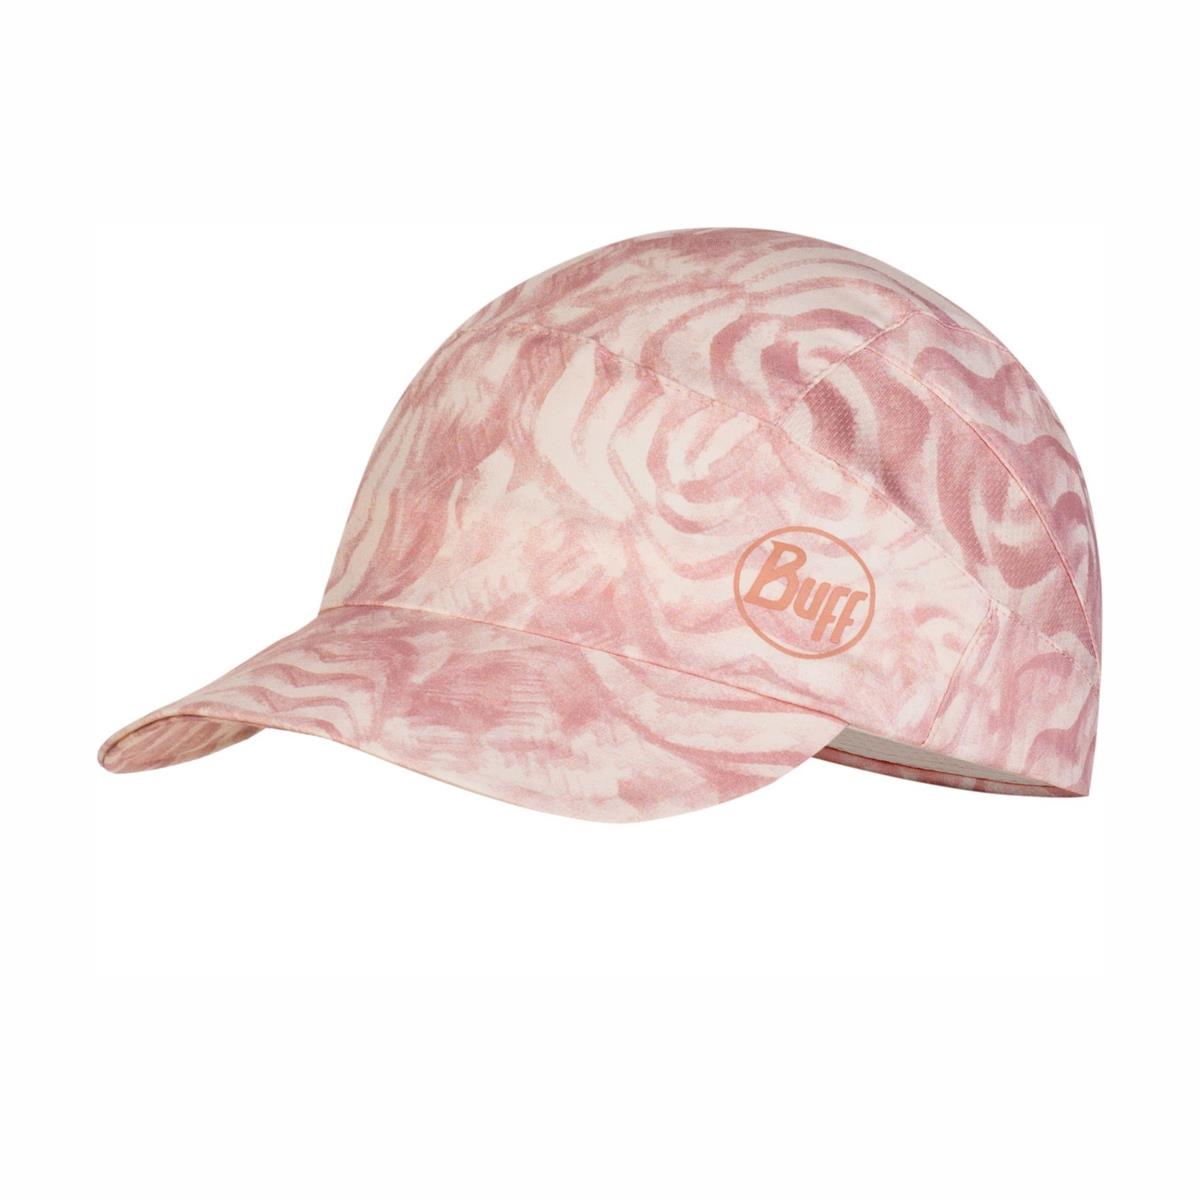 Кепка Pack Trek Cap Patterned Zoa Pale Pink US:one size (119522.508.10.00) Buff кепка взрослая